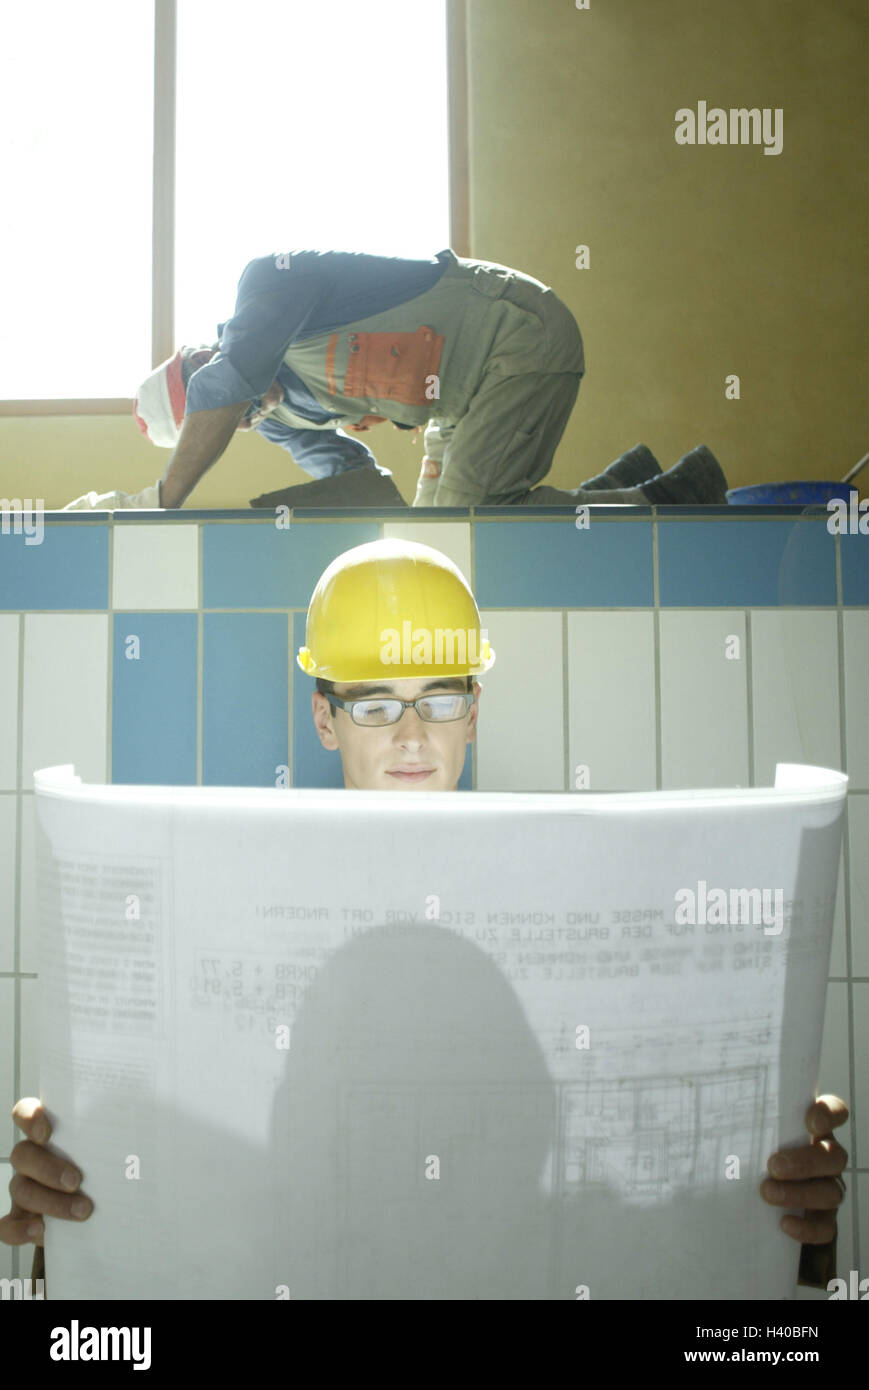 Men at work, swimming-pool, architect, construction helmet, plan, control, background, tiler construction, man, 20-30 years, occupation, work, structural engineer, developer, site manager, architect's plan, construction supervision, acceptance work, const Stock Photo